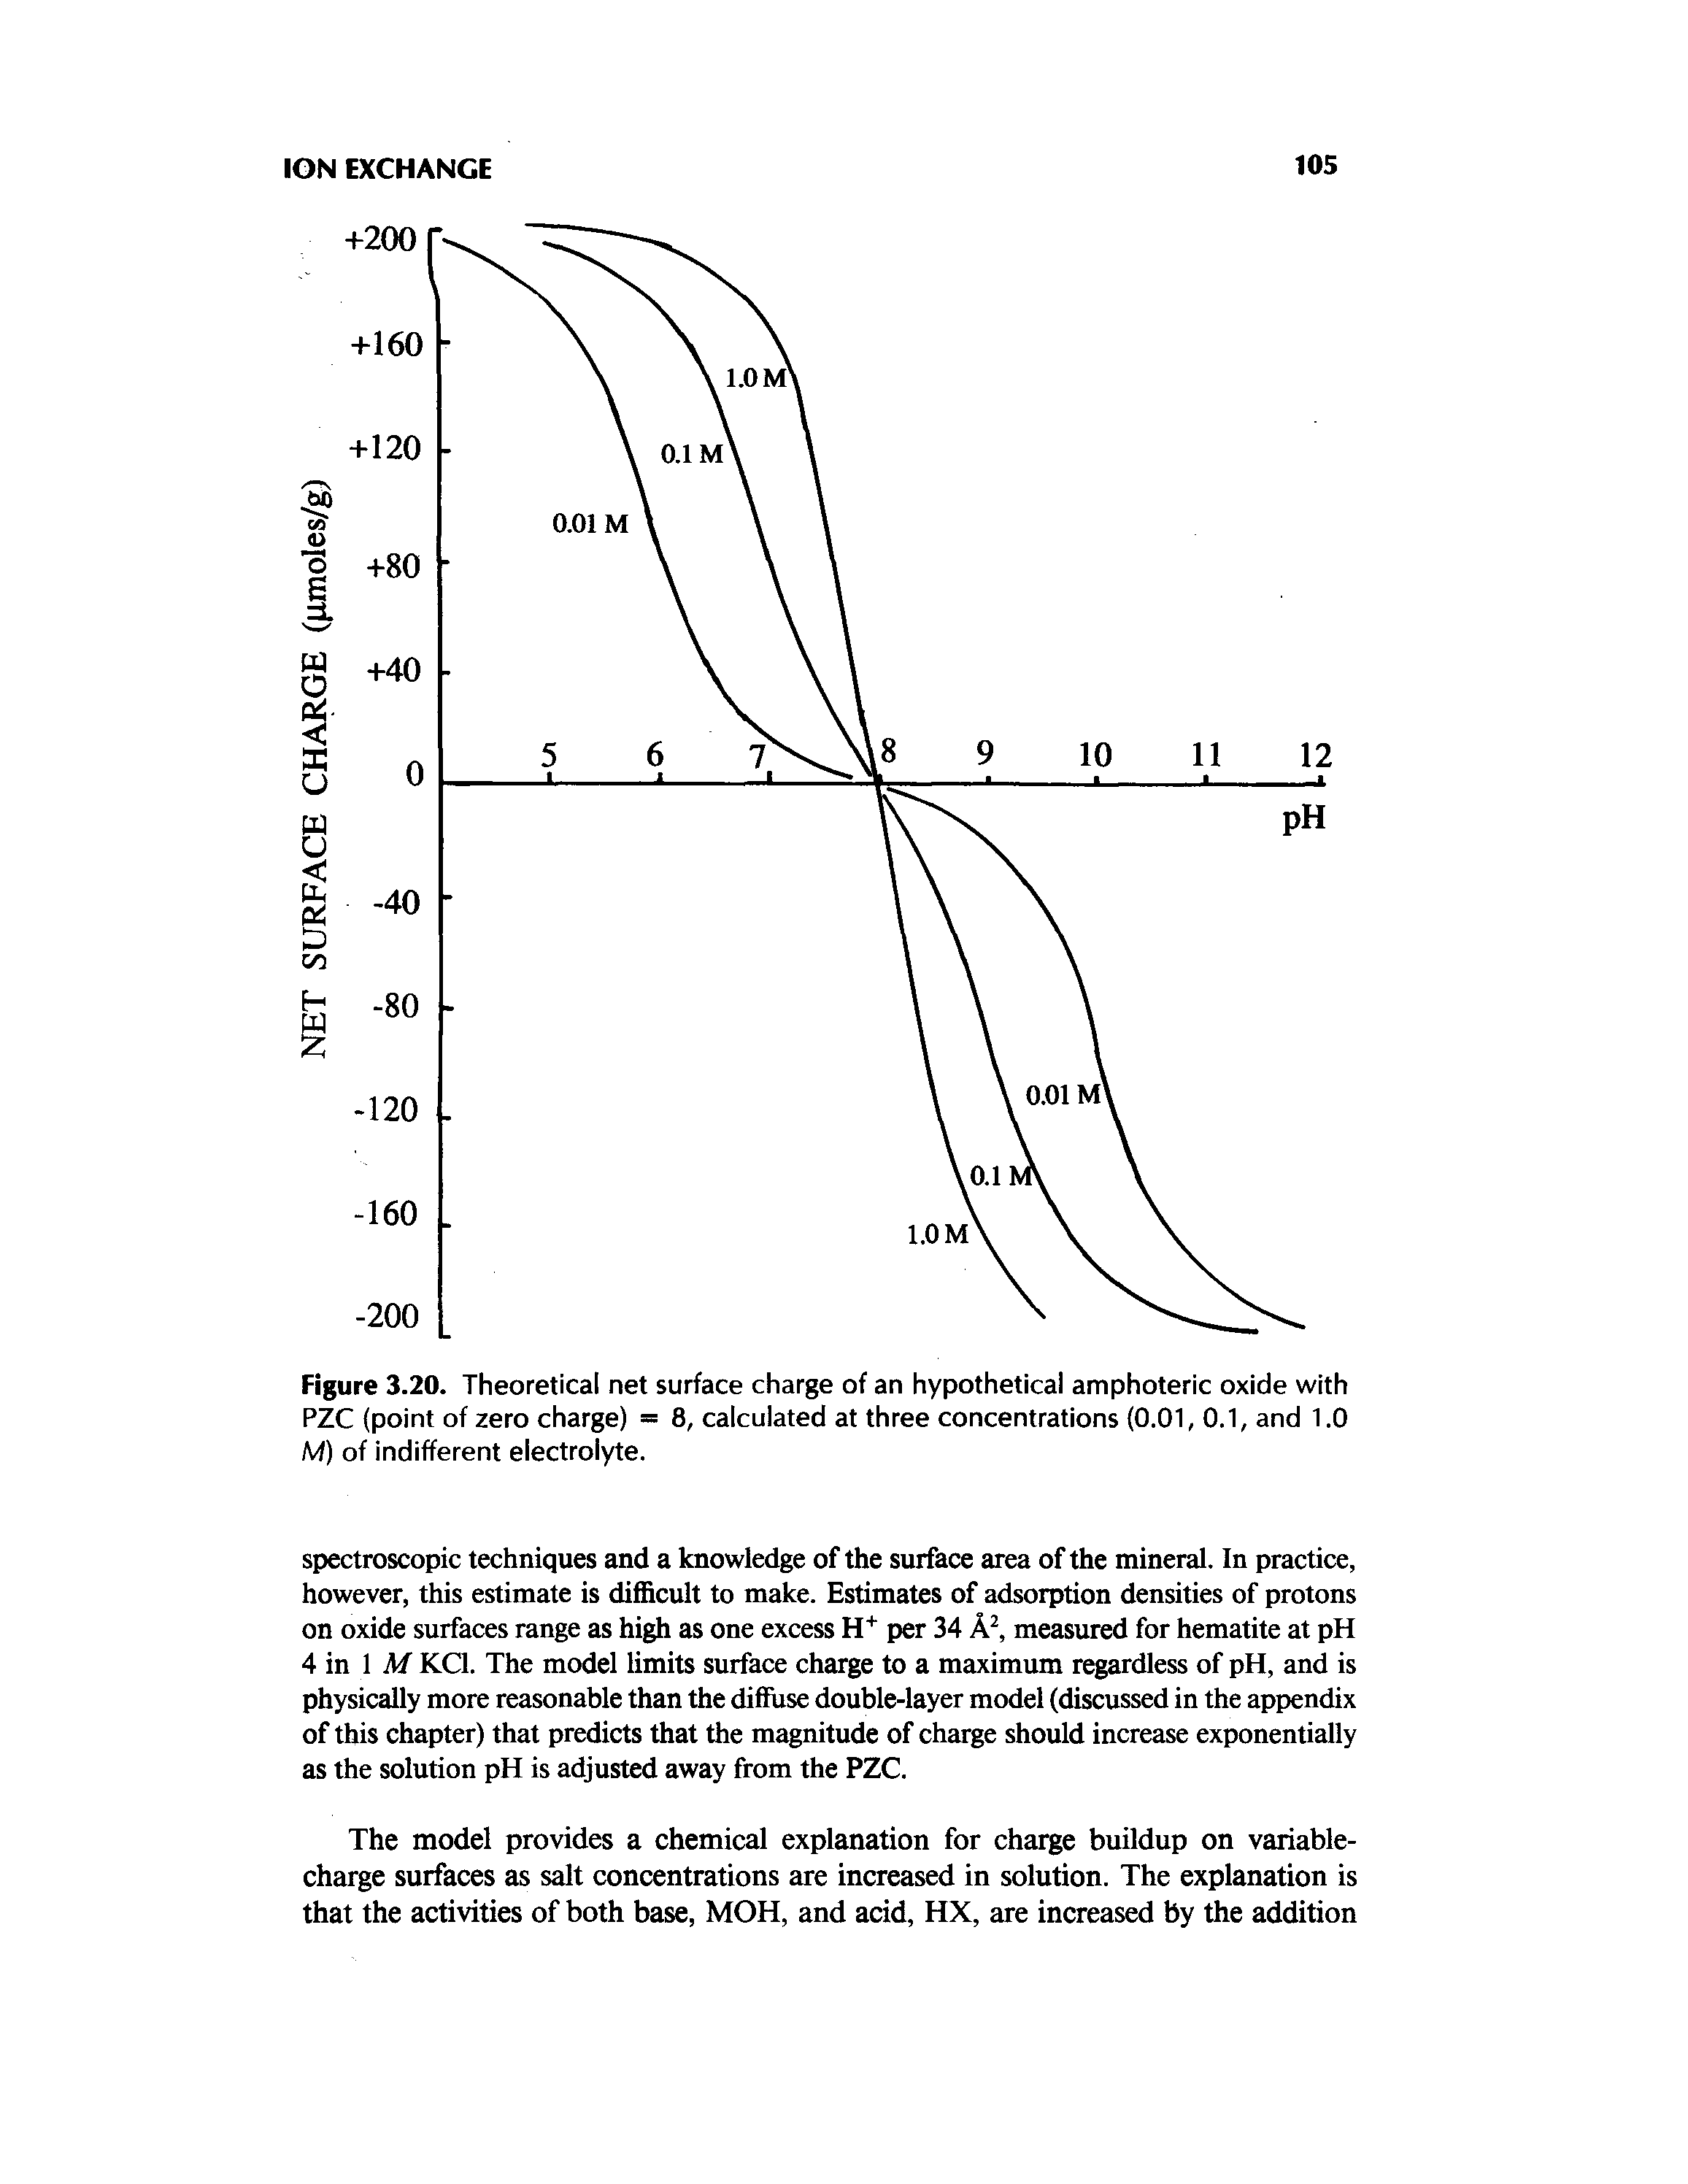 Figure 3.20. Theoretical net surface charge of an hypothetical amphoteric oxide with PZC (point of zero charge) = 8, calculated at three concentrations (0.01, 0.1, and 1.0 M) of indifferent electrolyte.